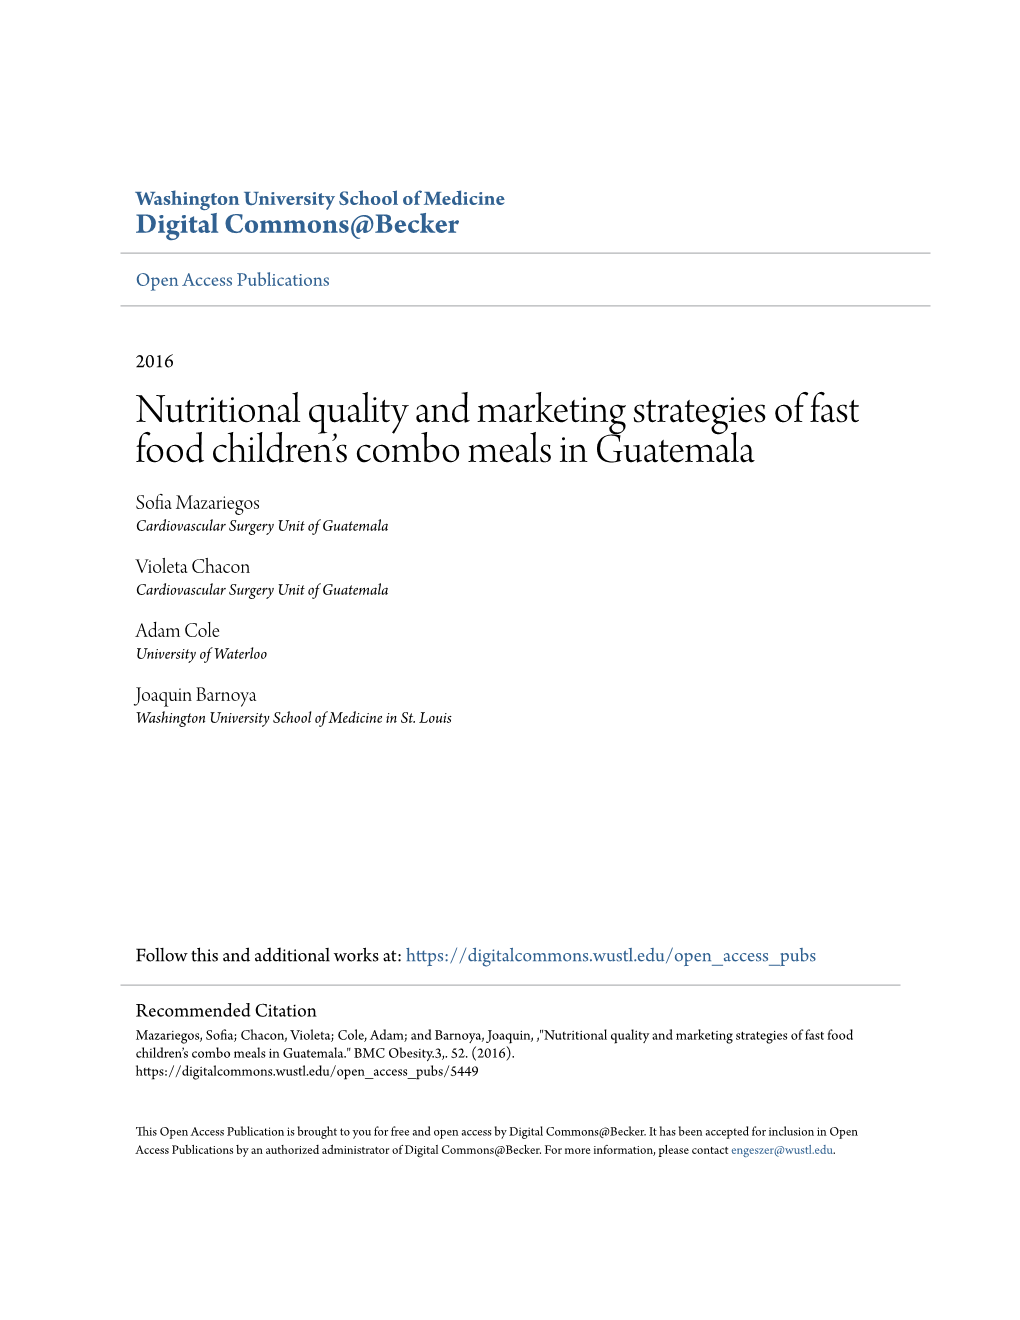 Nutritional Quality and Marketing Strategies of Fast Food Childrenâ•Žs